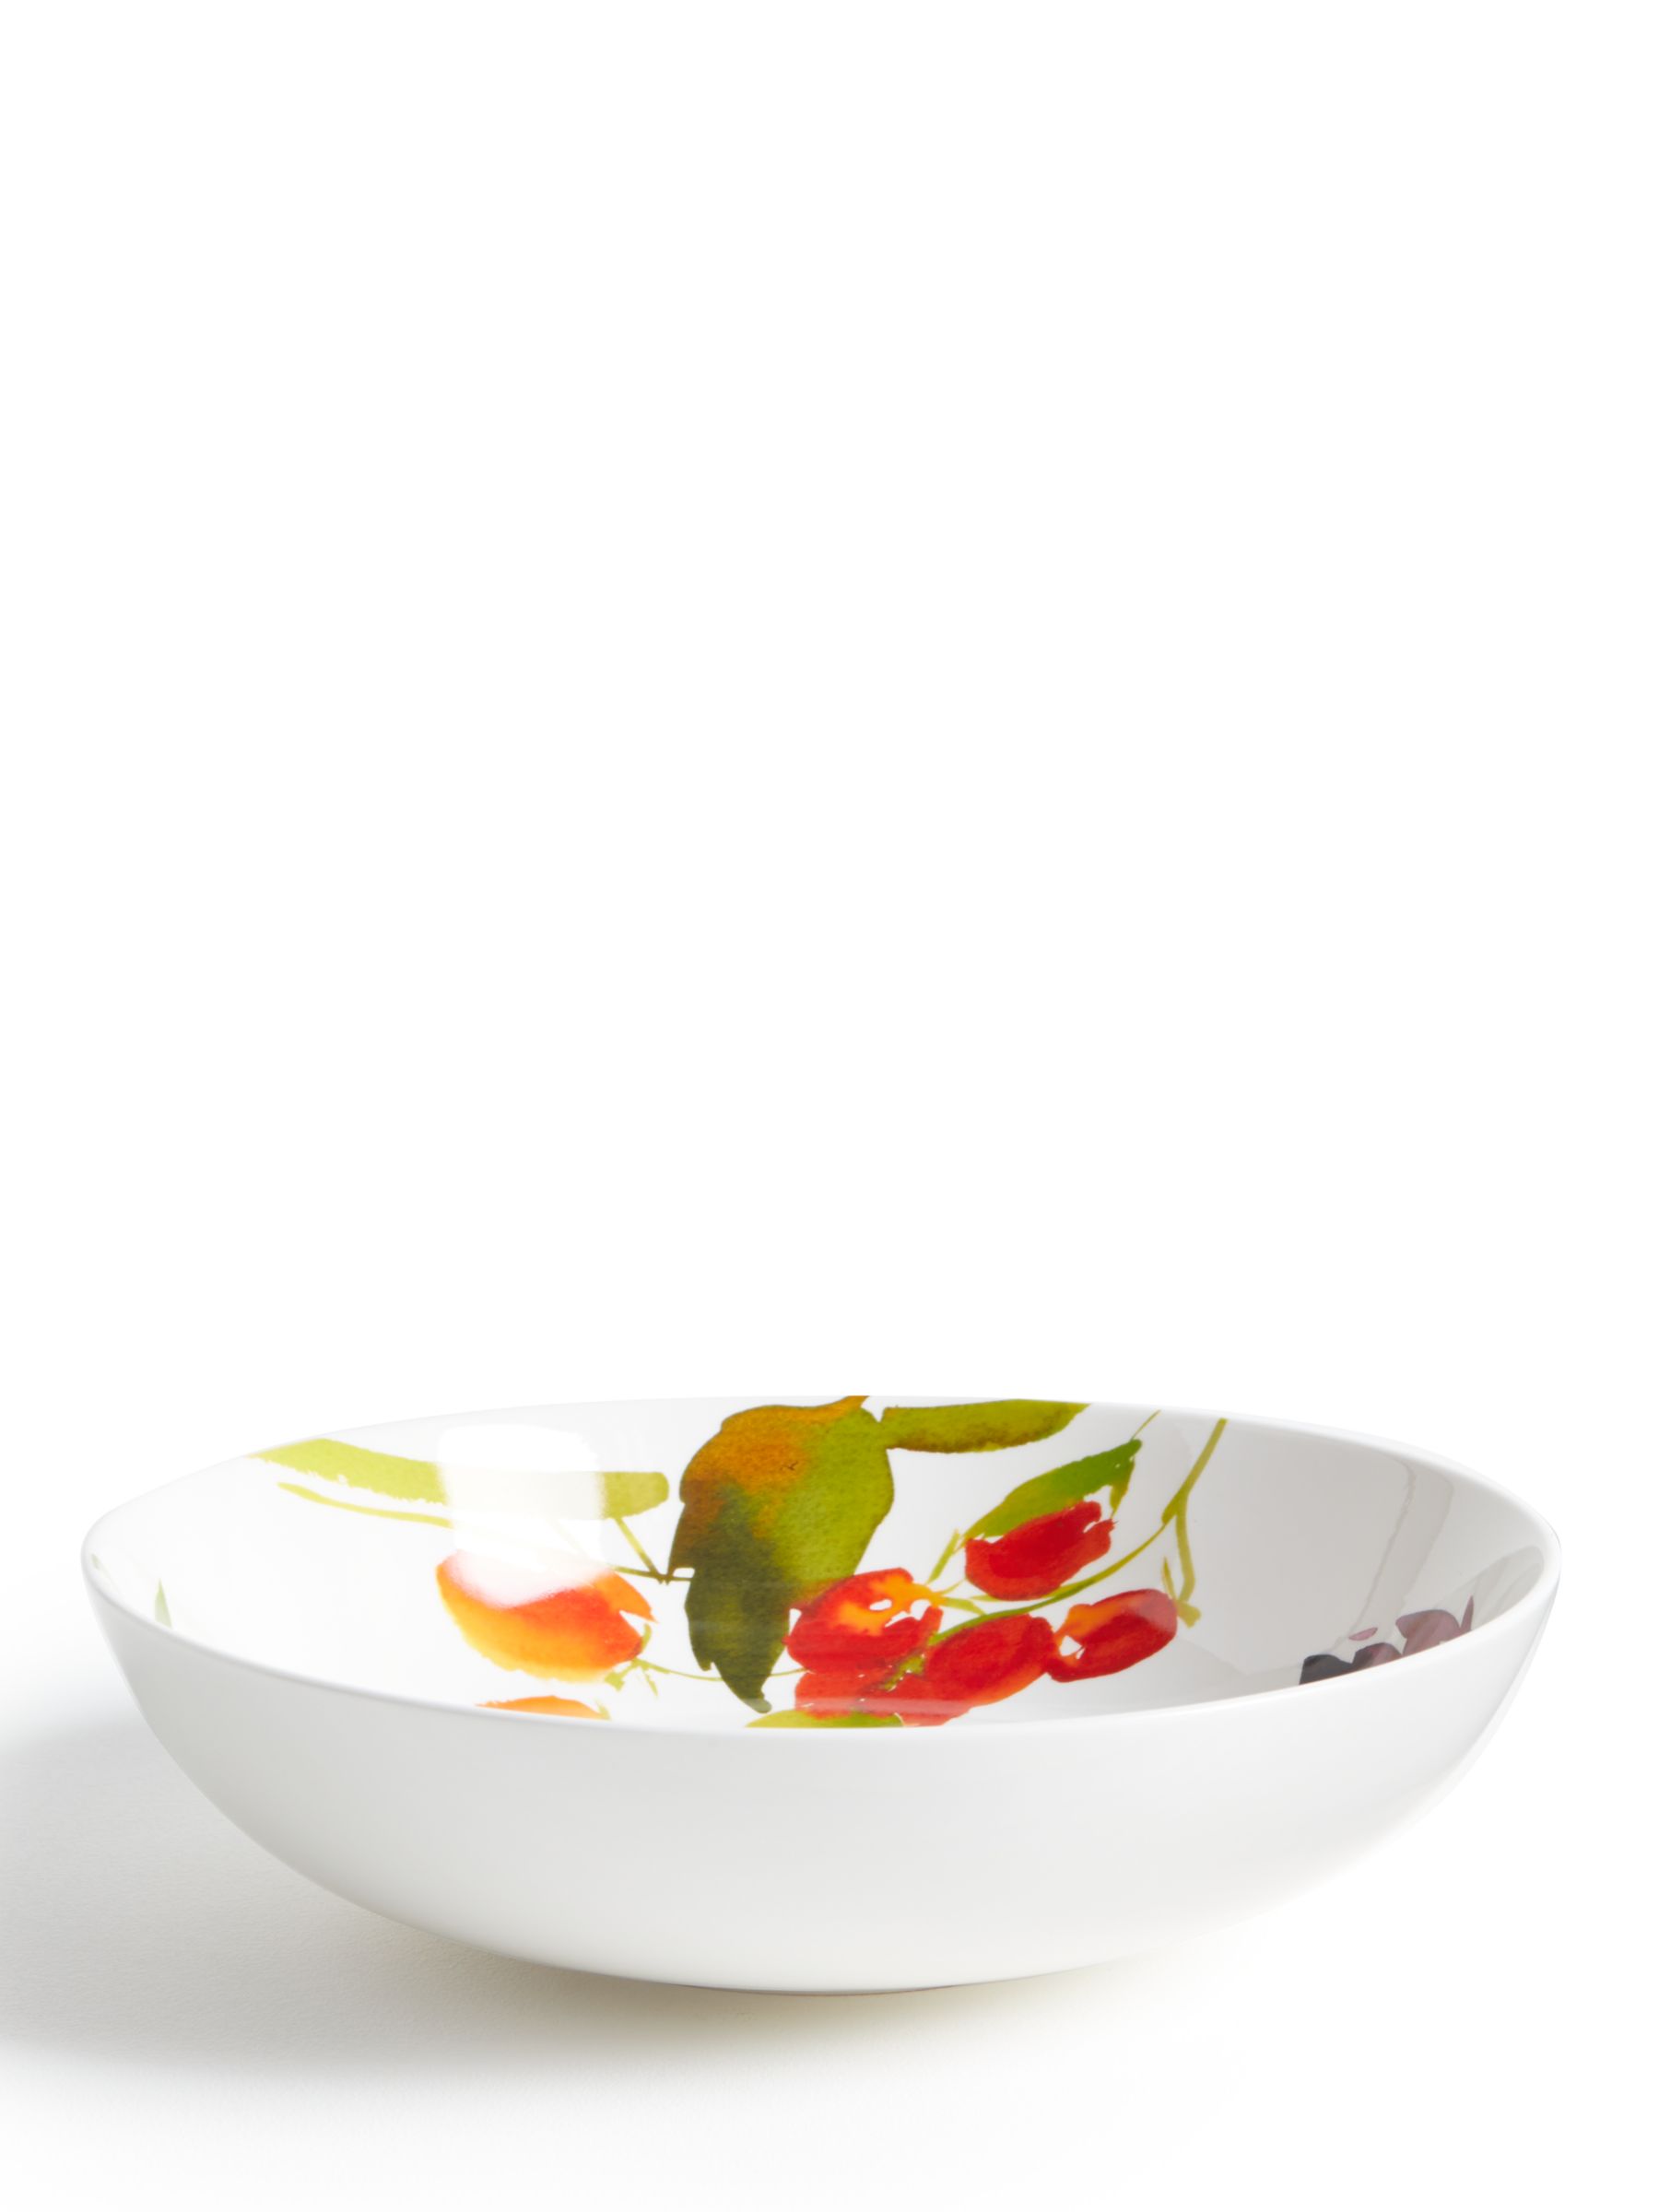 Ouliveiro White Pasta Set with Serving Bowl by Brilliant